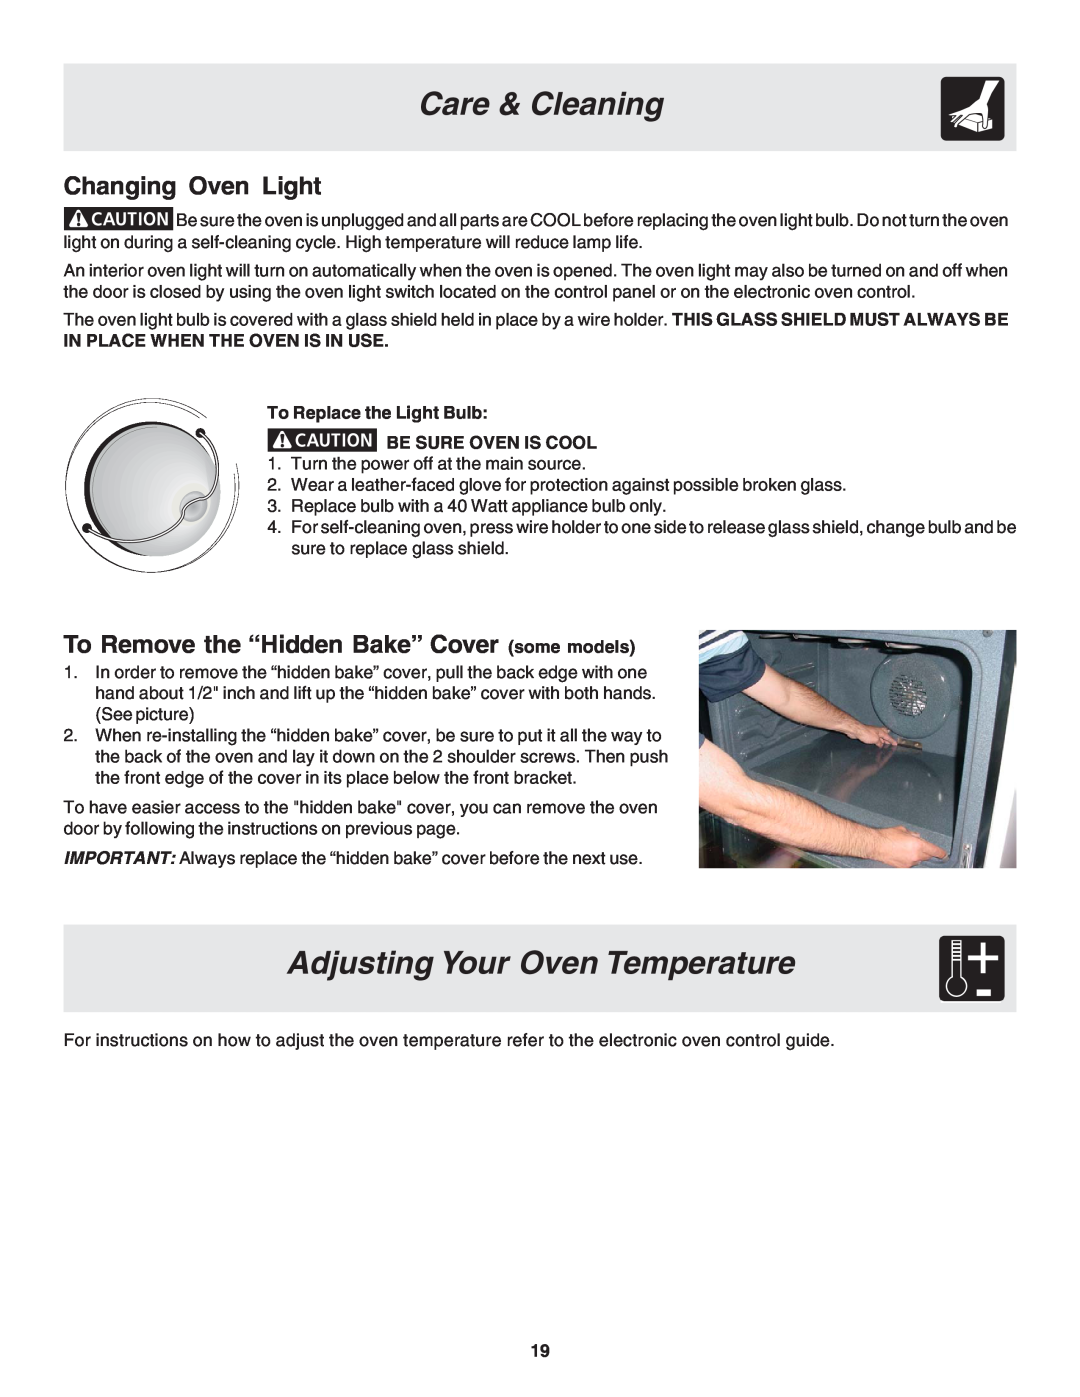 Frigidaire 318203863 warranty Adjusting Your Oven Temperature, Care & Cleaning, Changing Oven Light 